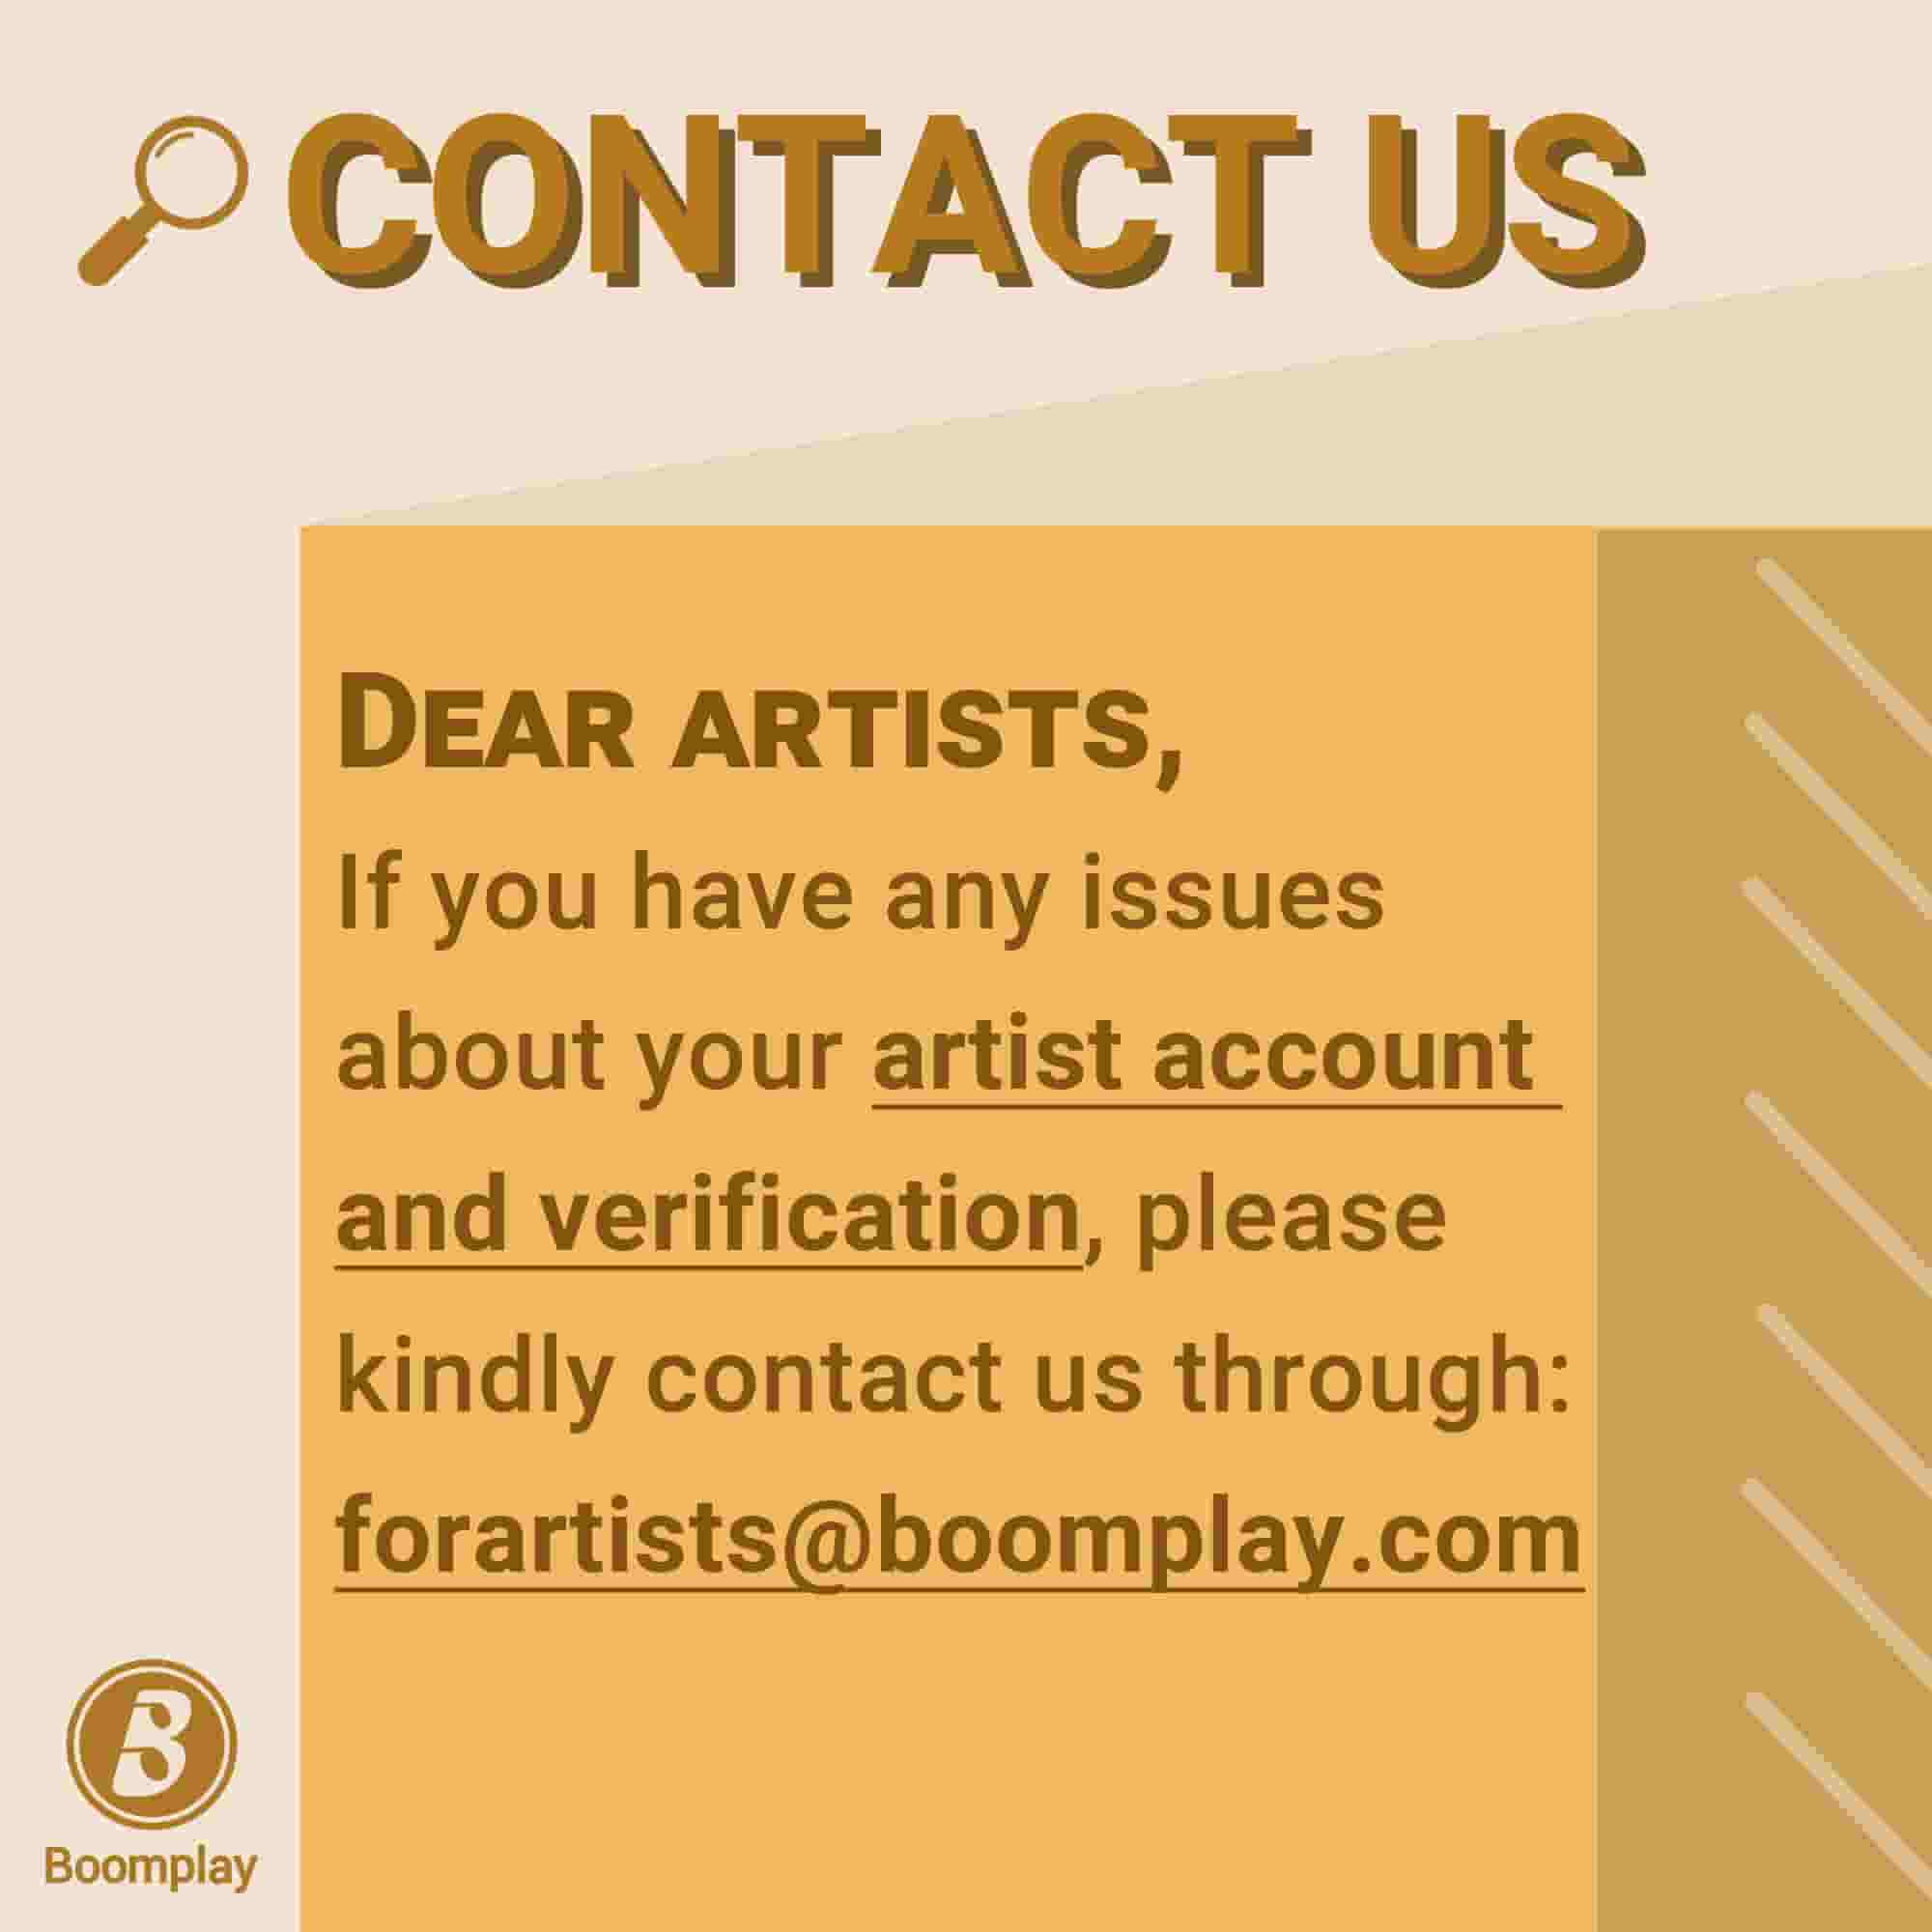 If you have any issues with your artist account and verification, please kindly contact us!